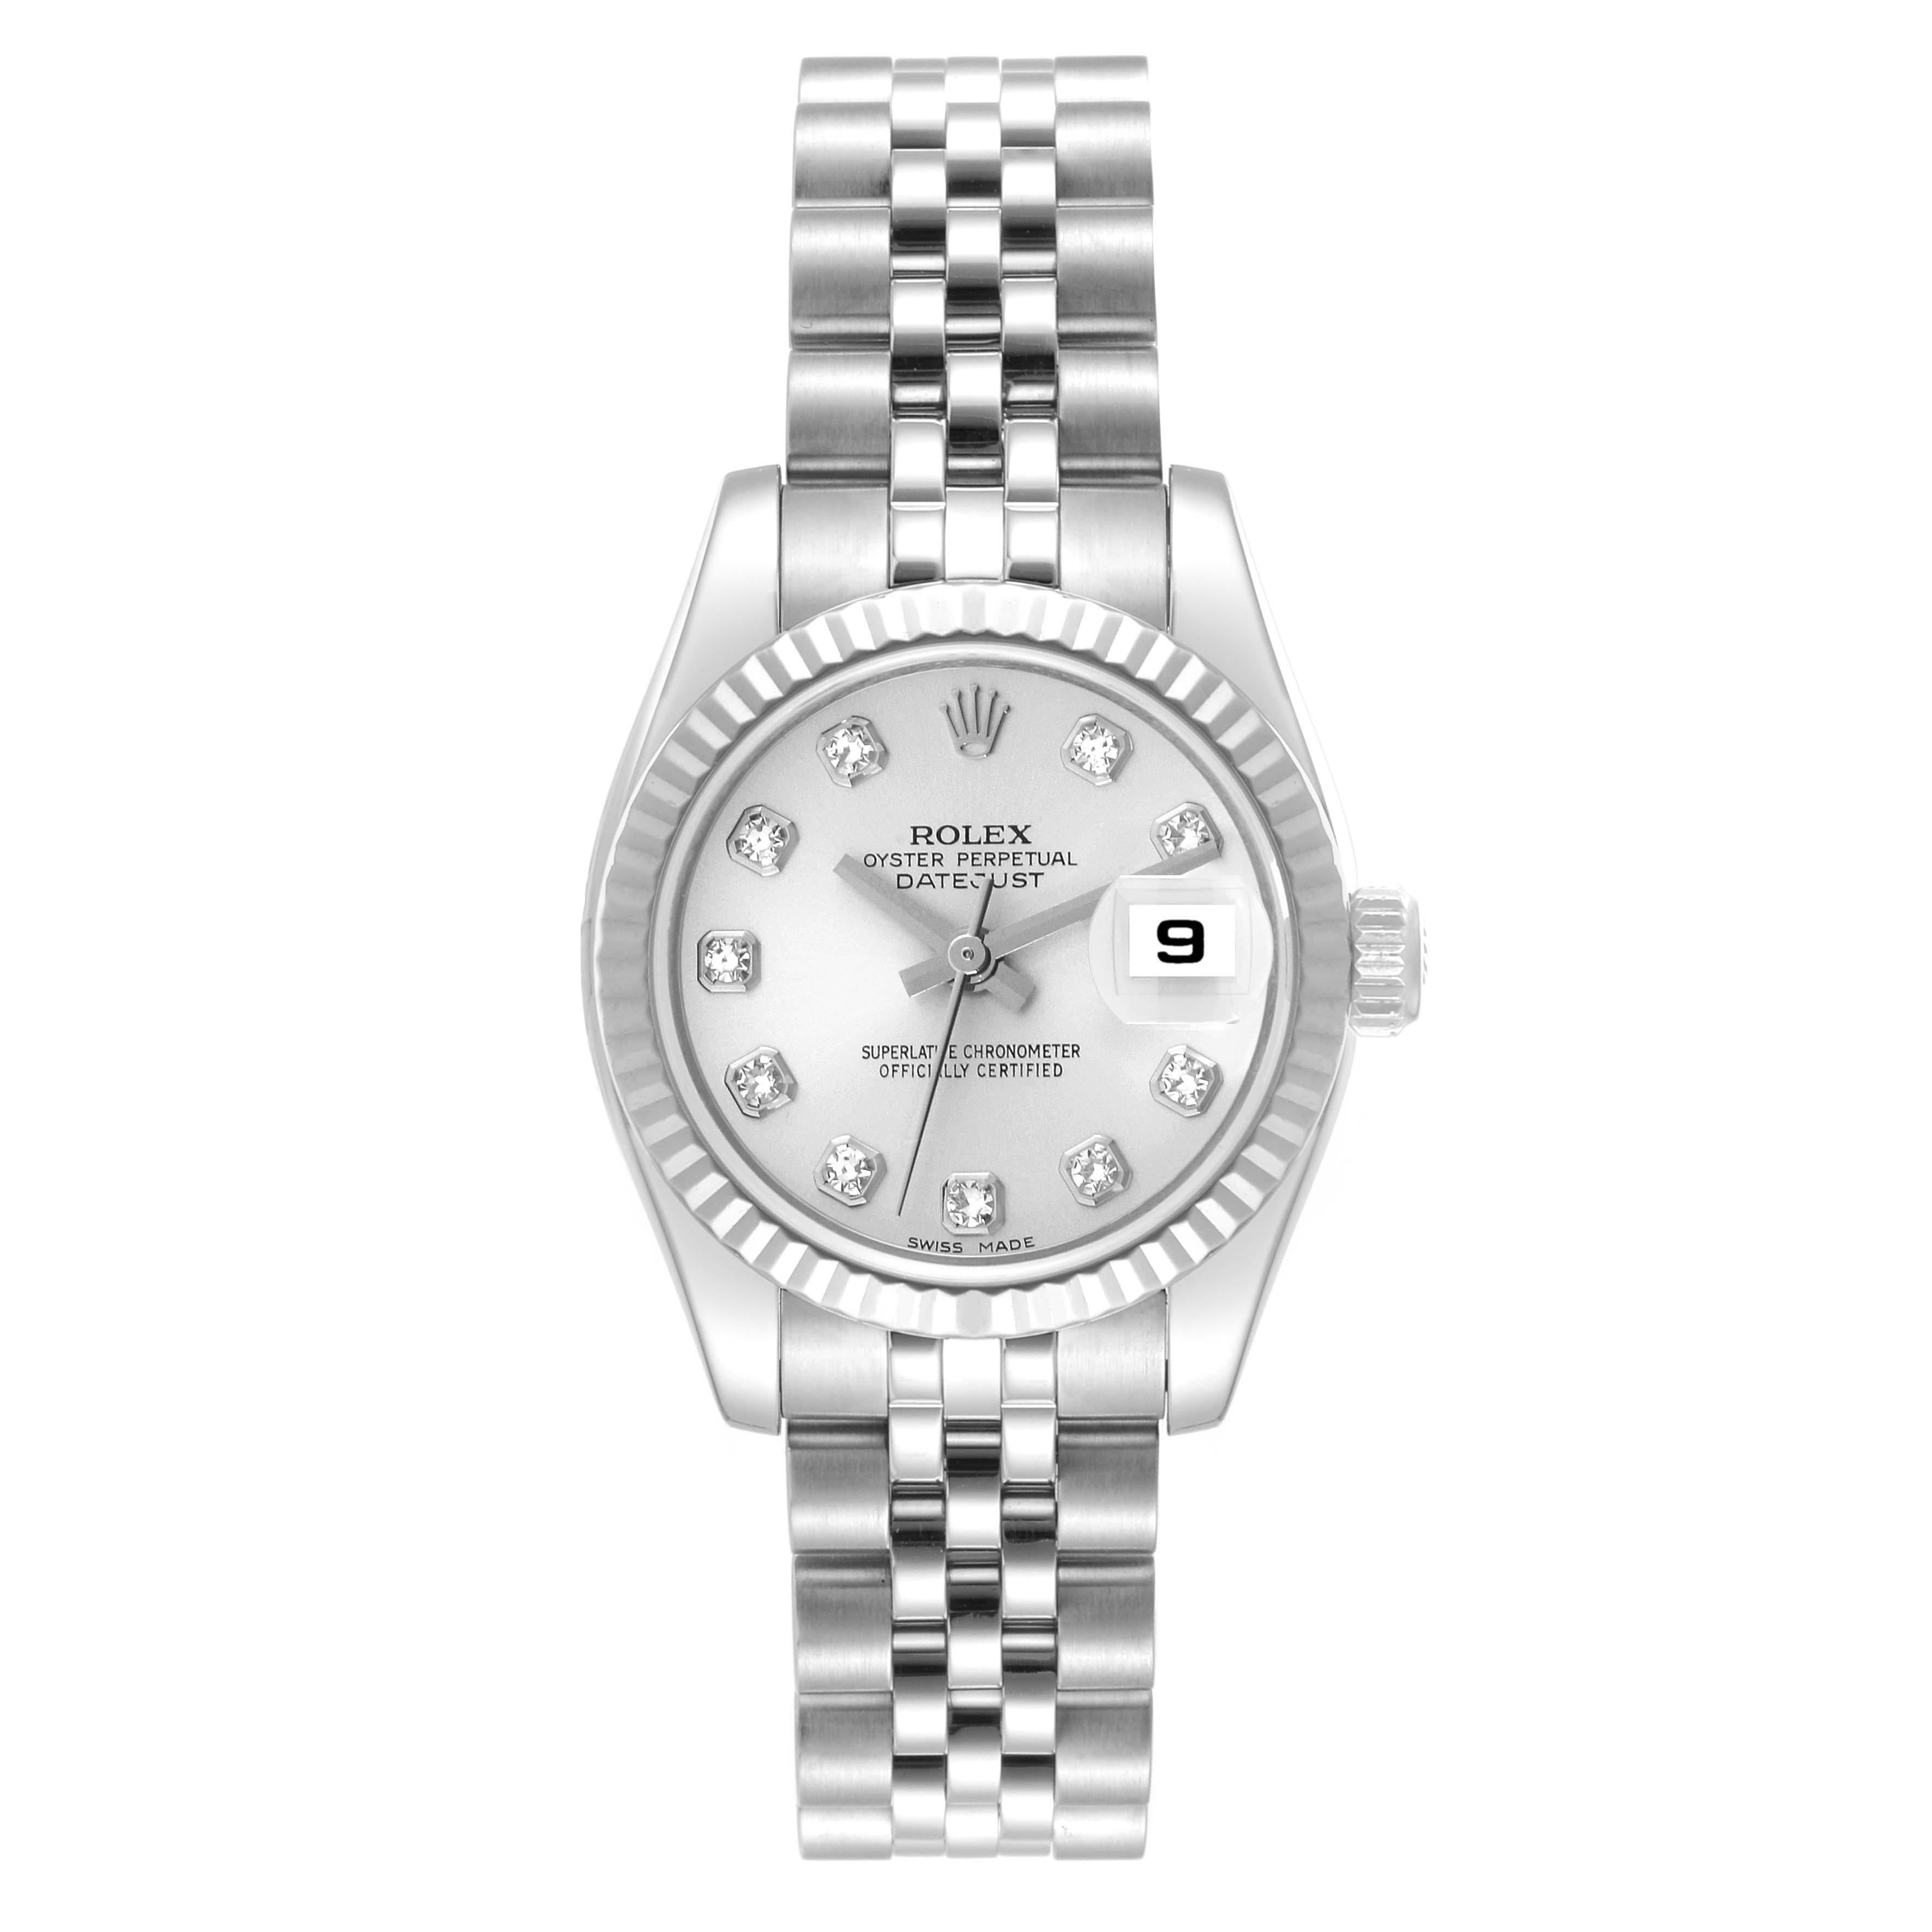 Rolex Datejust Steel White Gold Diamond Dial Ladies Watch 179174. Officially certified chronometer automatic self-winding movement. Stainless steel oyster case 26.0 mm in diameter. Rolex logo on the crown. 18K white gold fluted bezel. Scratch